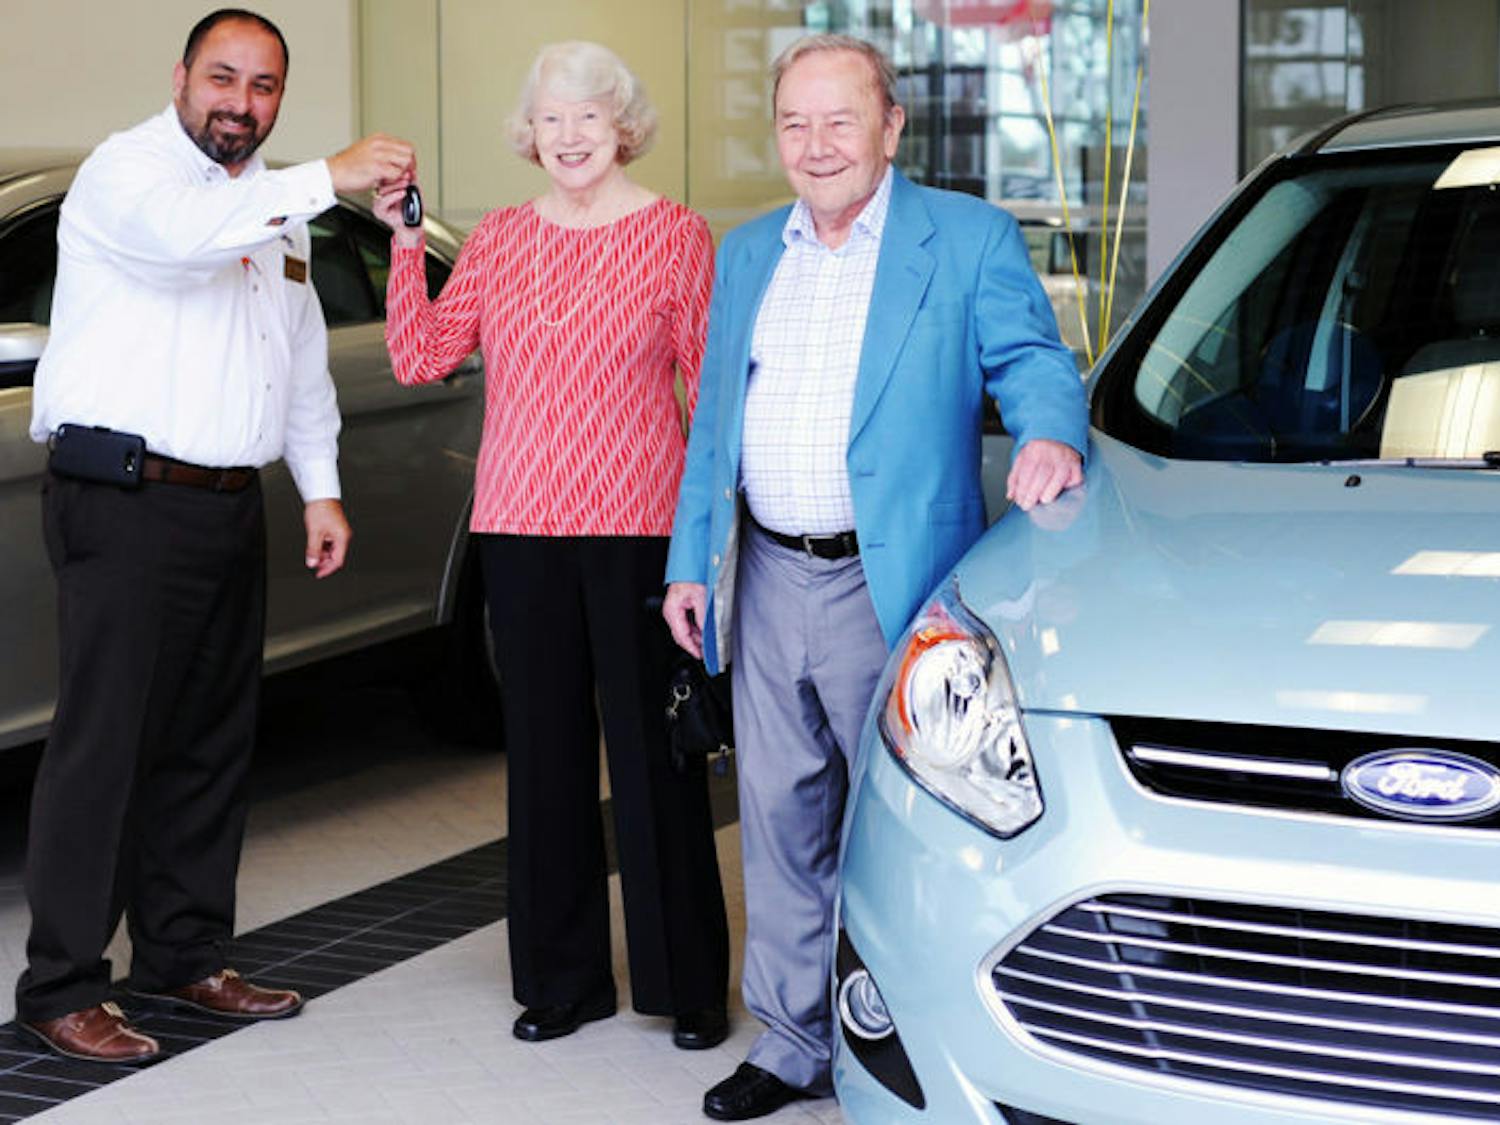 Michael Grimaldi, General Sales Manager of Parks Ford Lincoln of Gainesville, hands the keys to a 2014 Ford C-MAX Hybrid to Albert Traversa and his wife Mary Hausler.